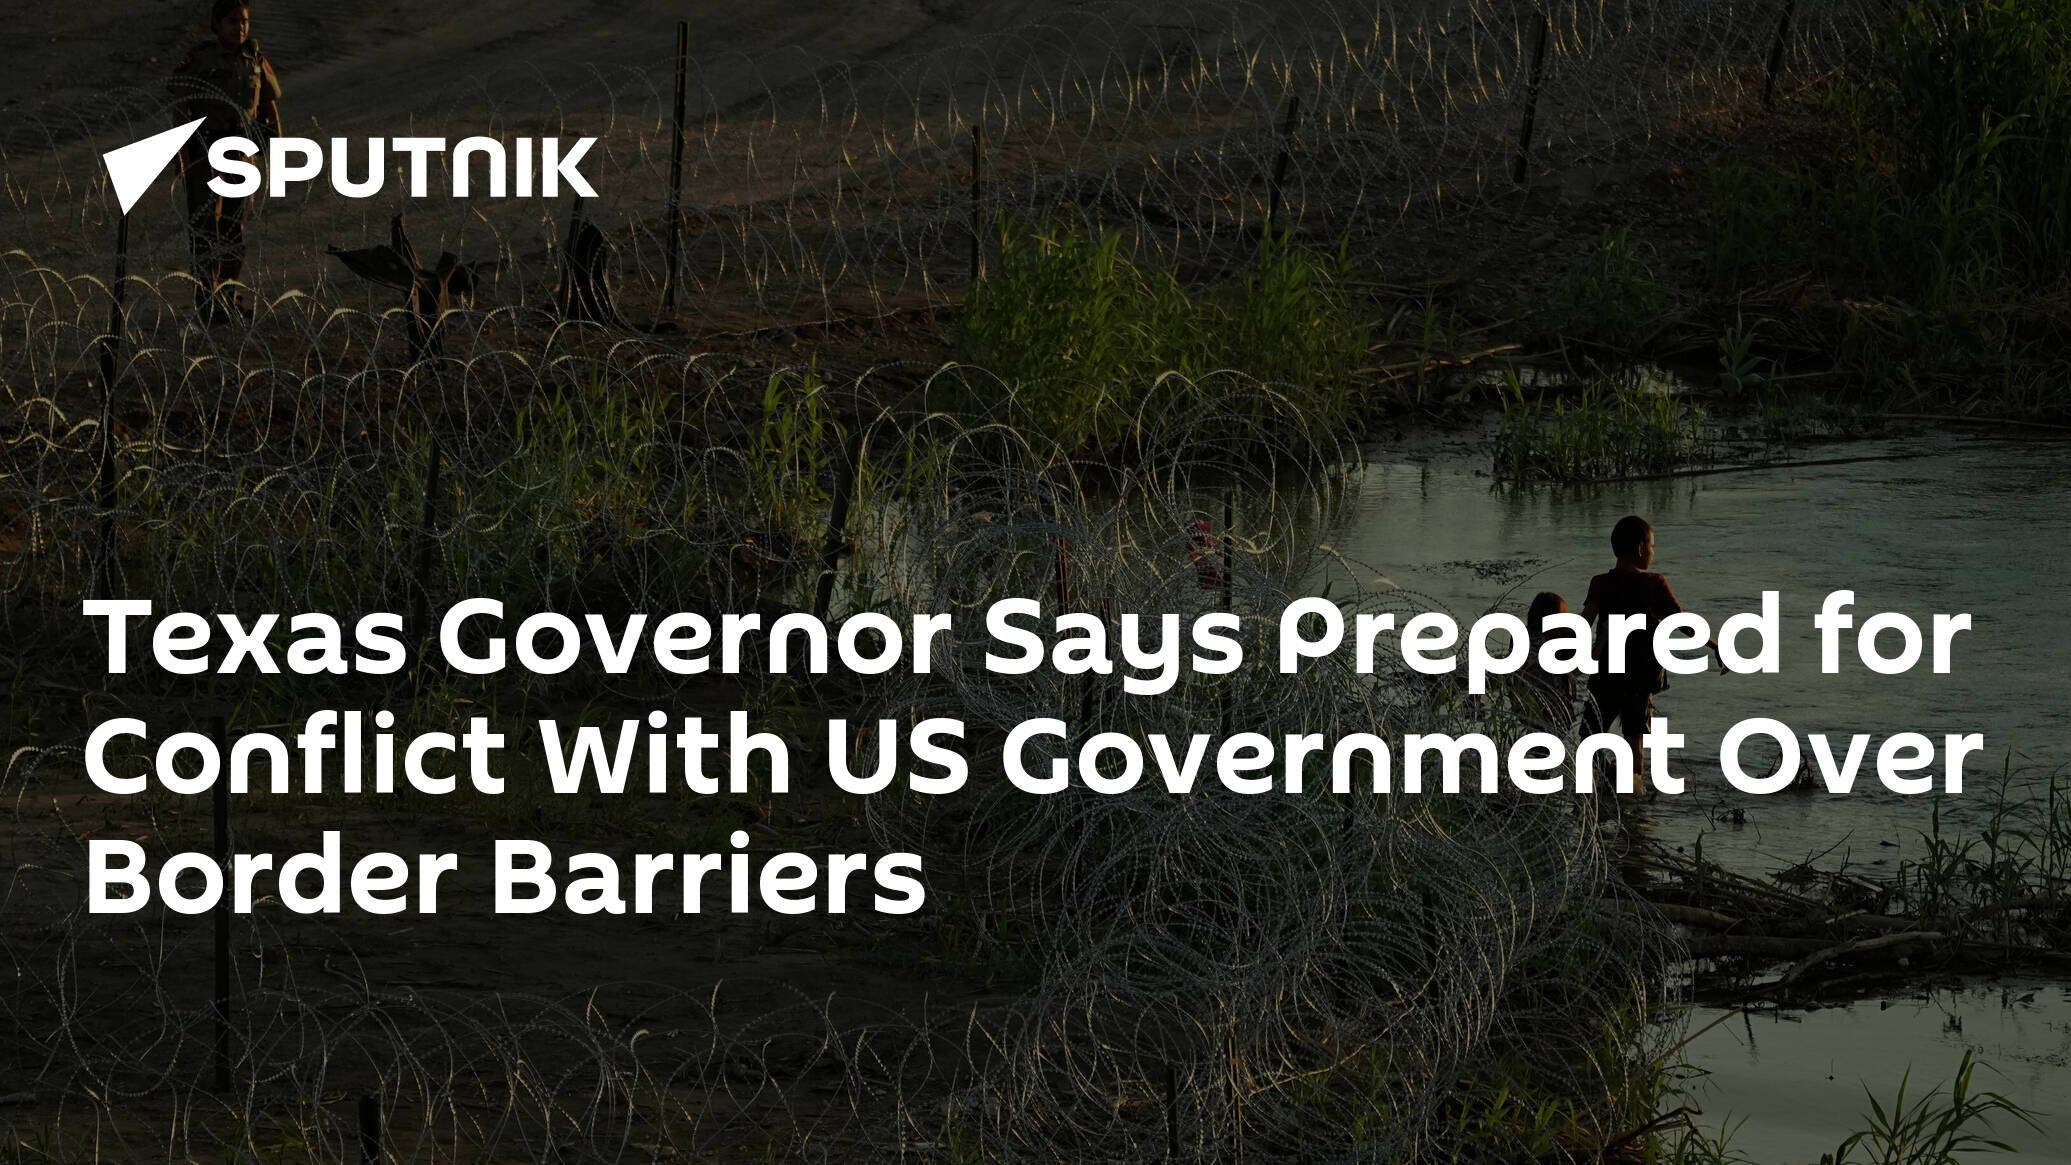 Texas Governor Says Prepared for Conflict With US Government Over Border Barriers